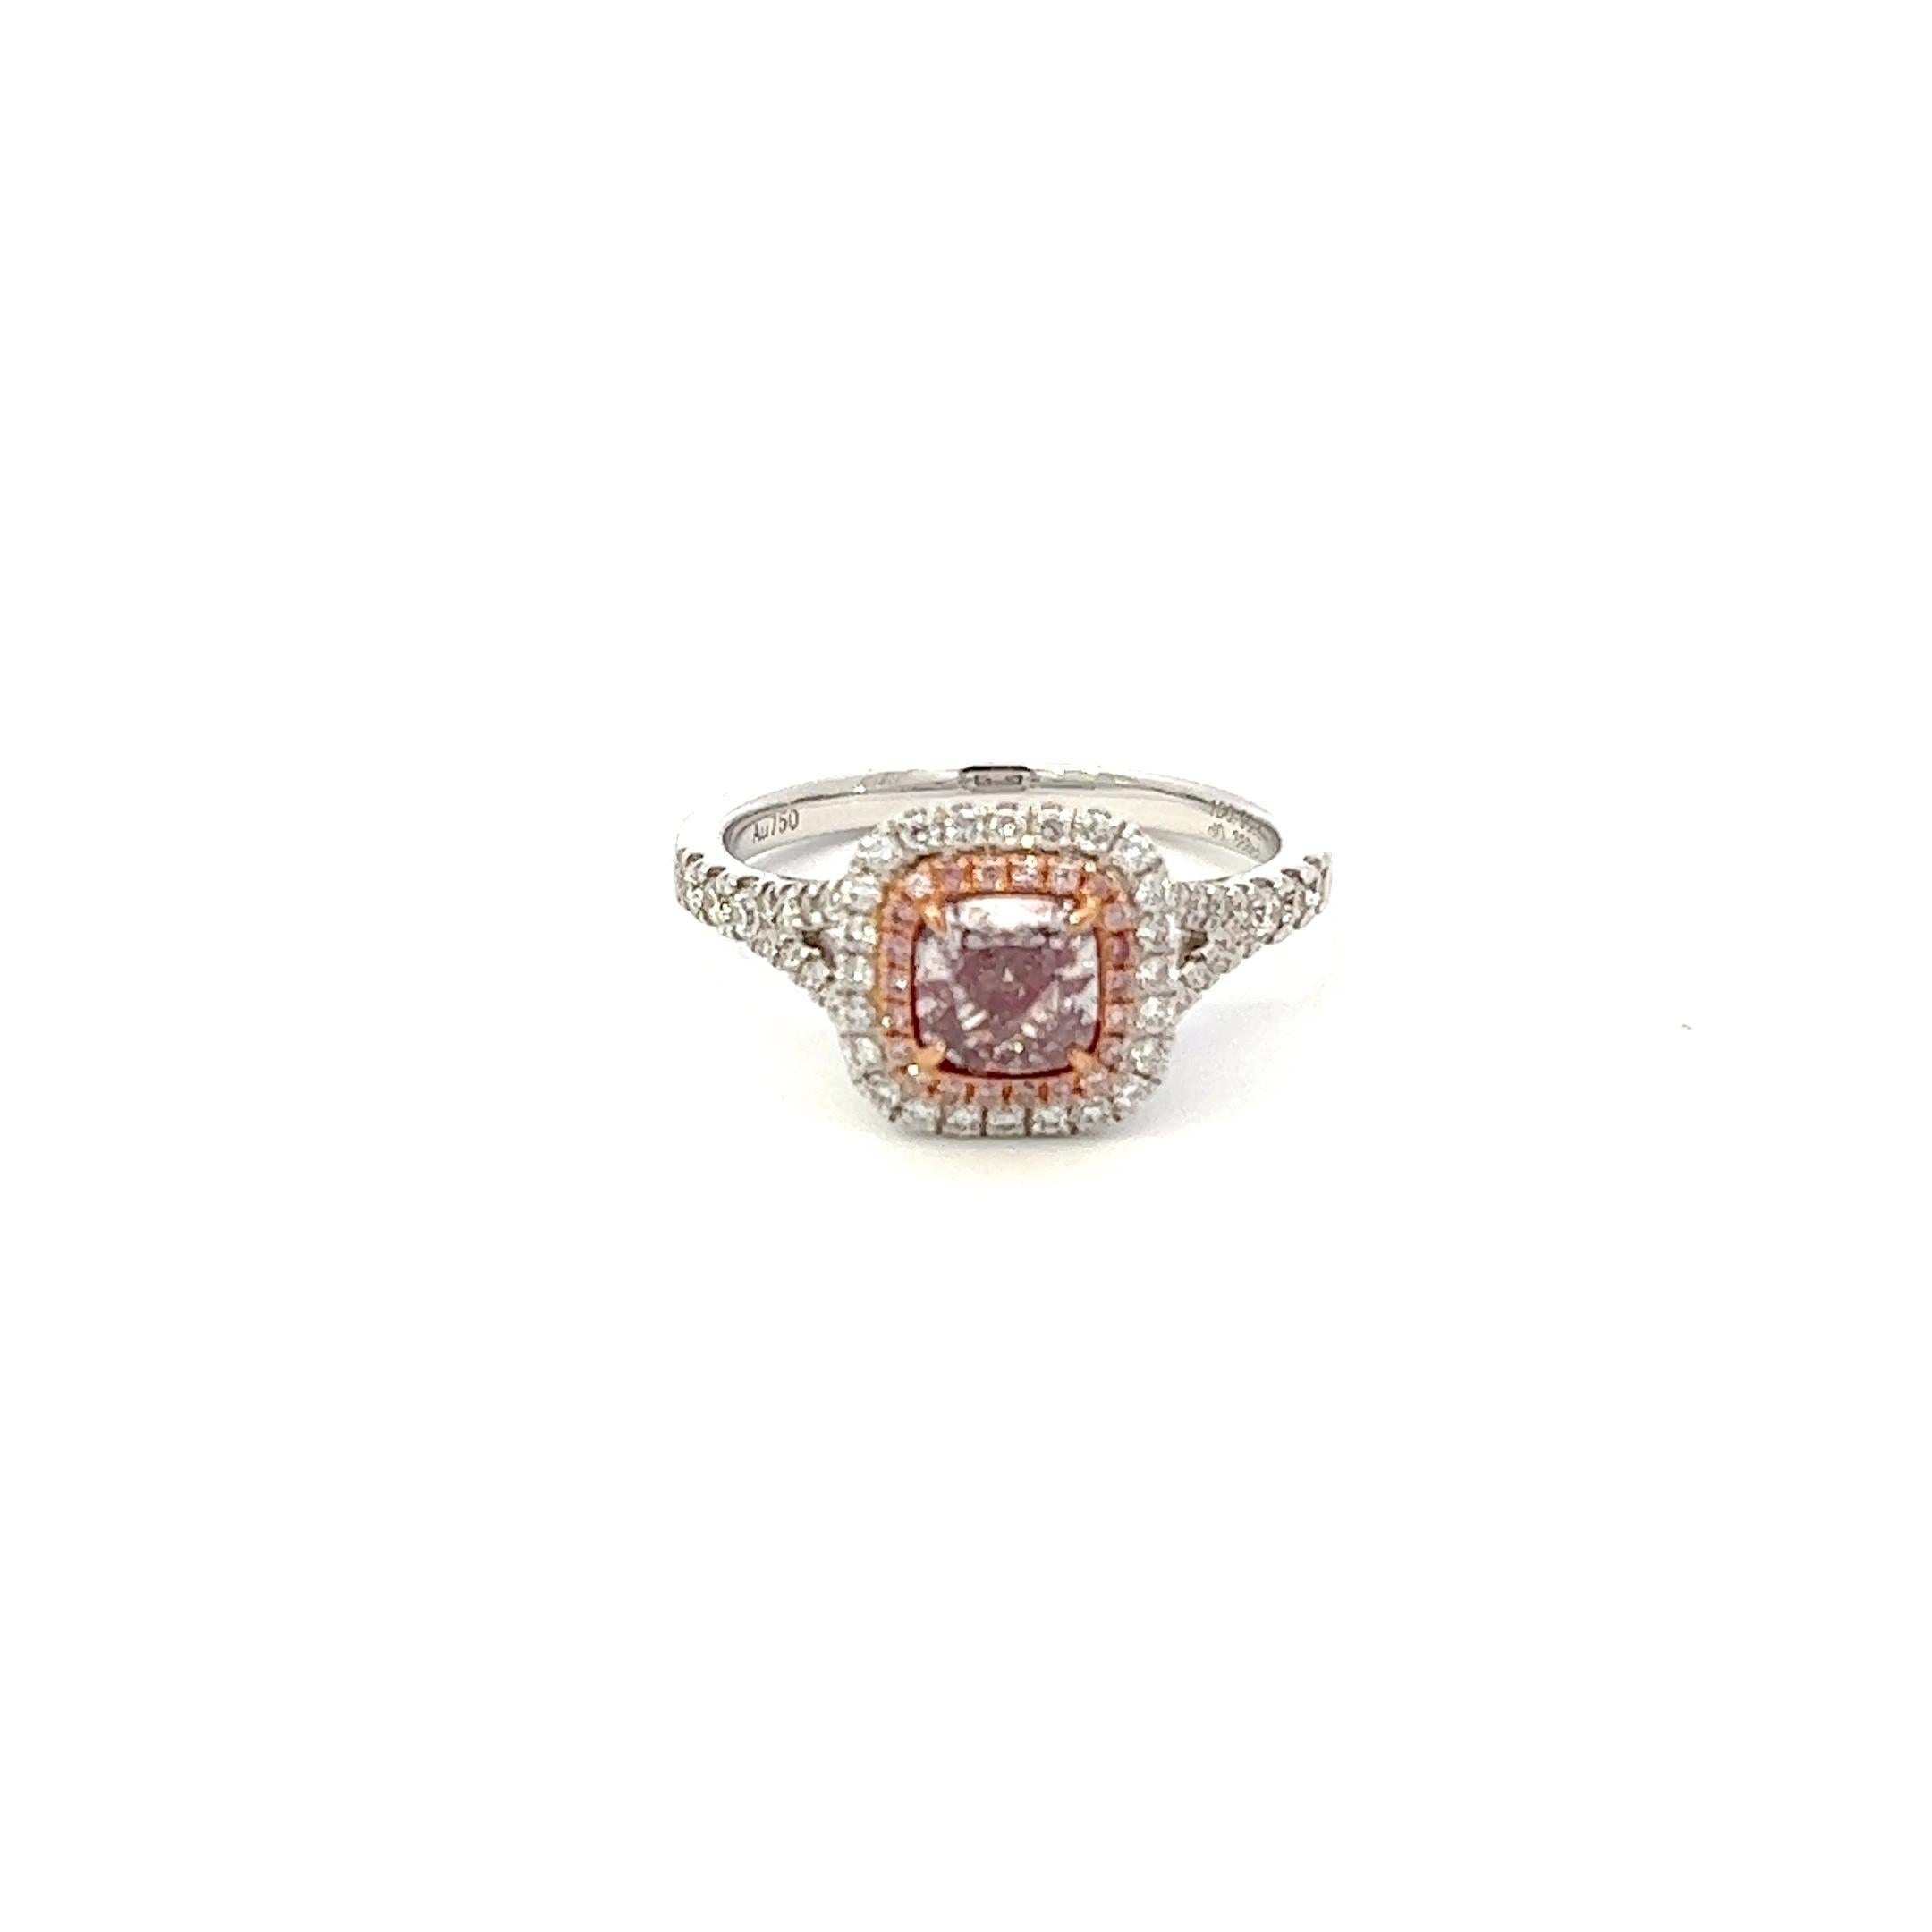 Center: 0.90ct Fancy Light Brown-Pink Cushion GIA# 2213115577
Setting: 18k White Gold 0.38ctw Pink and White Diamonds

An extremely rare and stunning natural pink diamond center. Pink Diamonds account for less than 0.01% of all diamonds mined in the